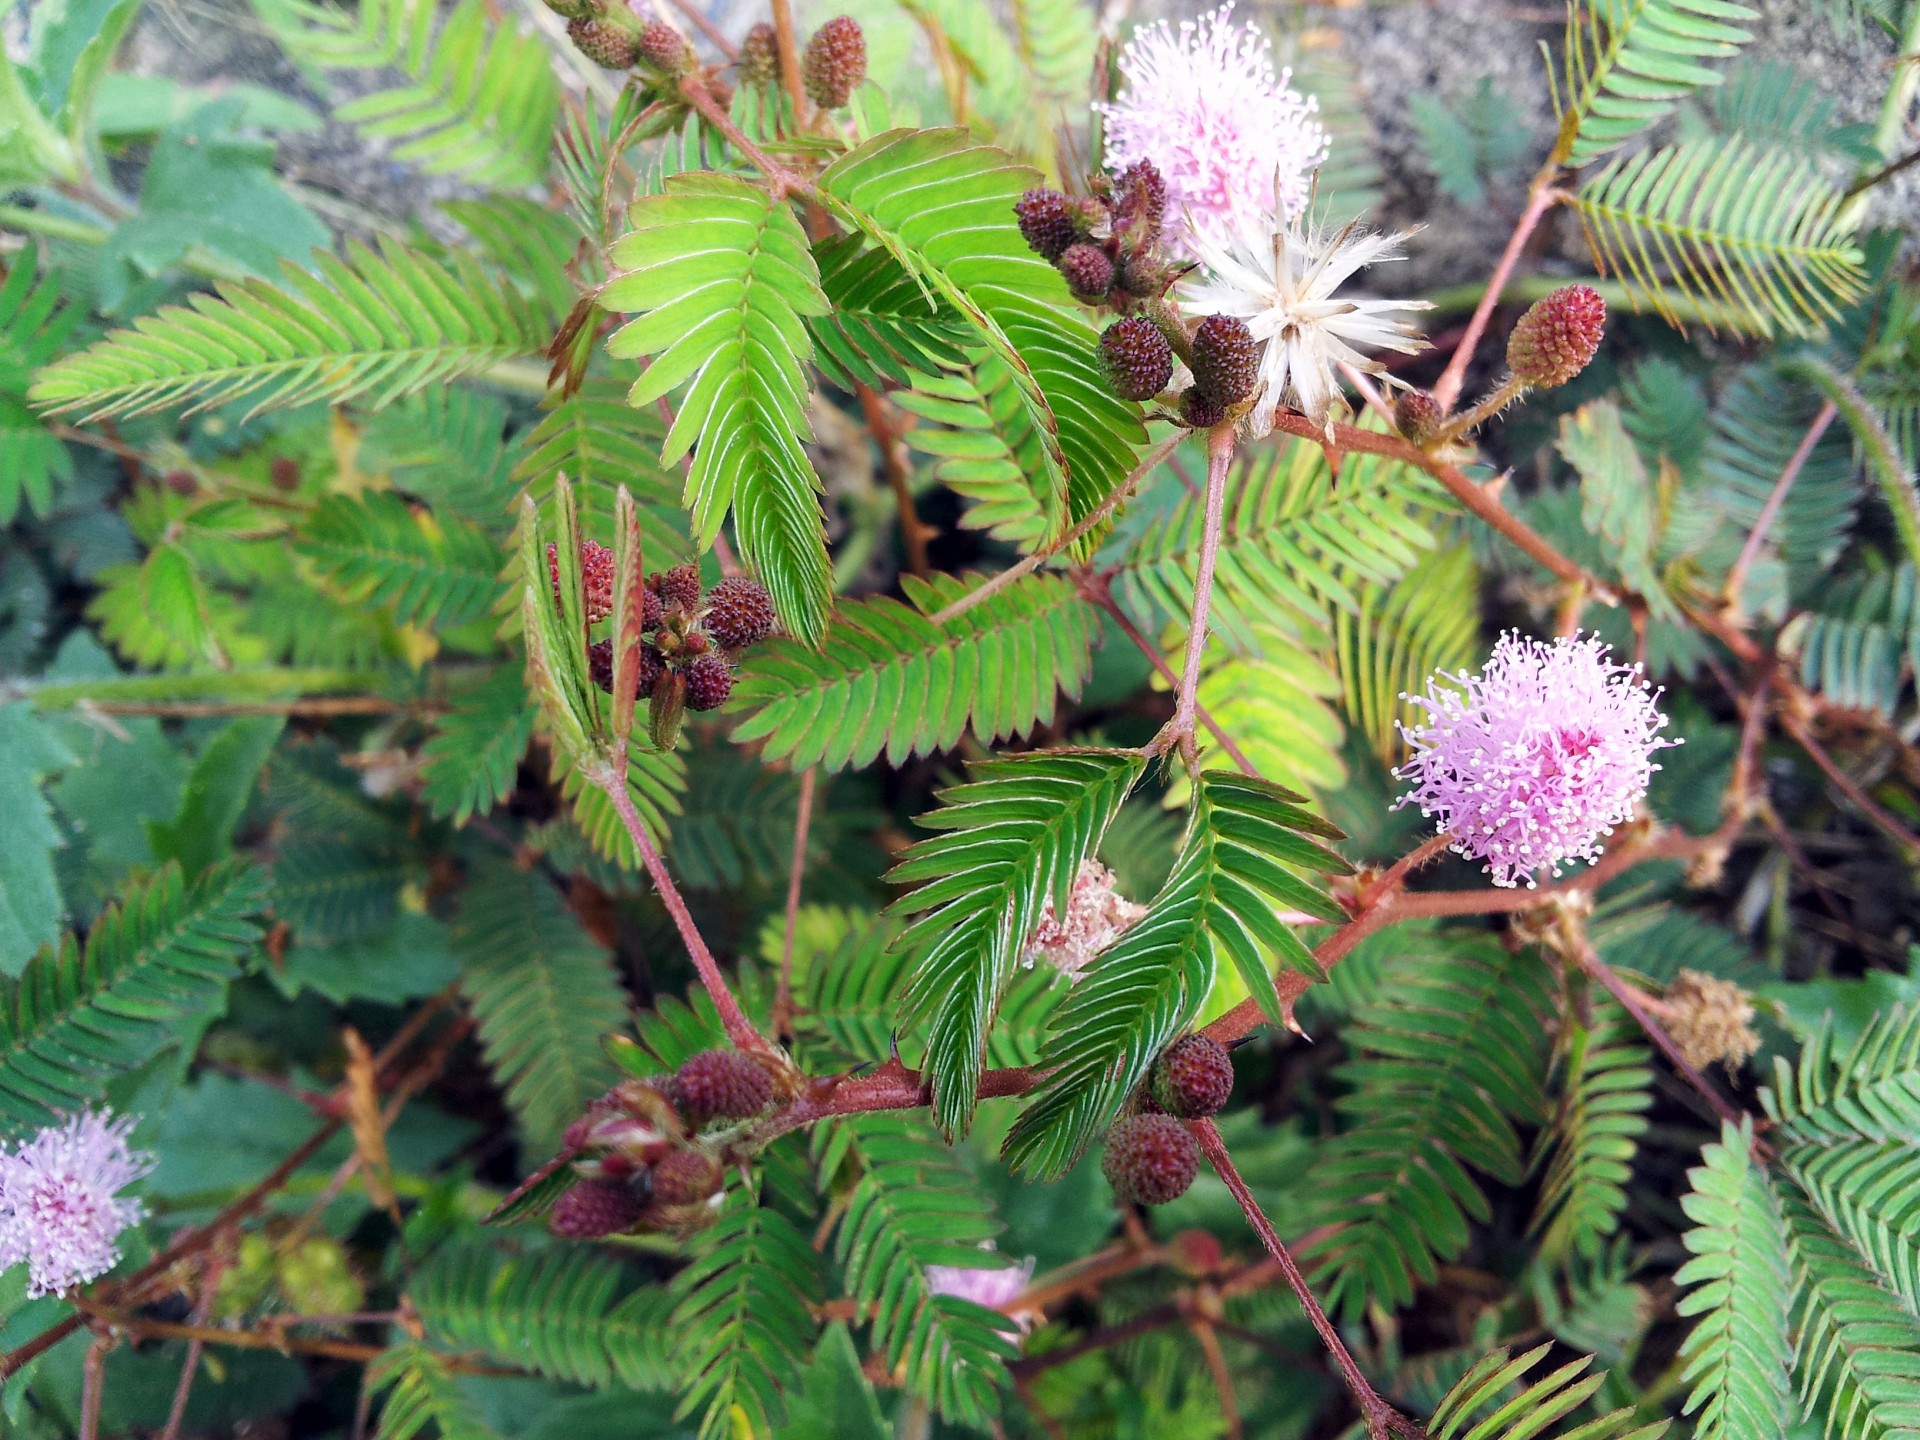 Mimosa Flower And Seeds 2